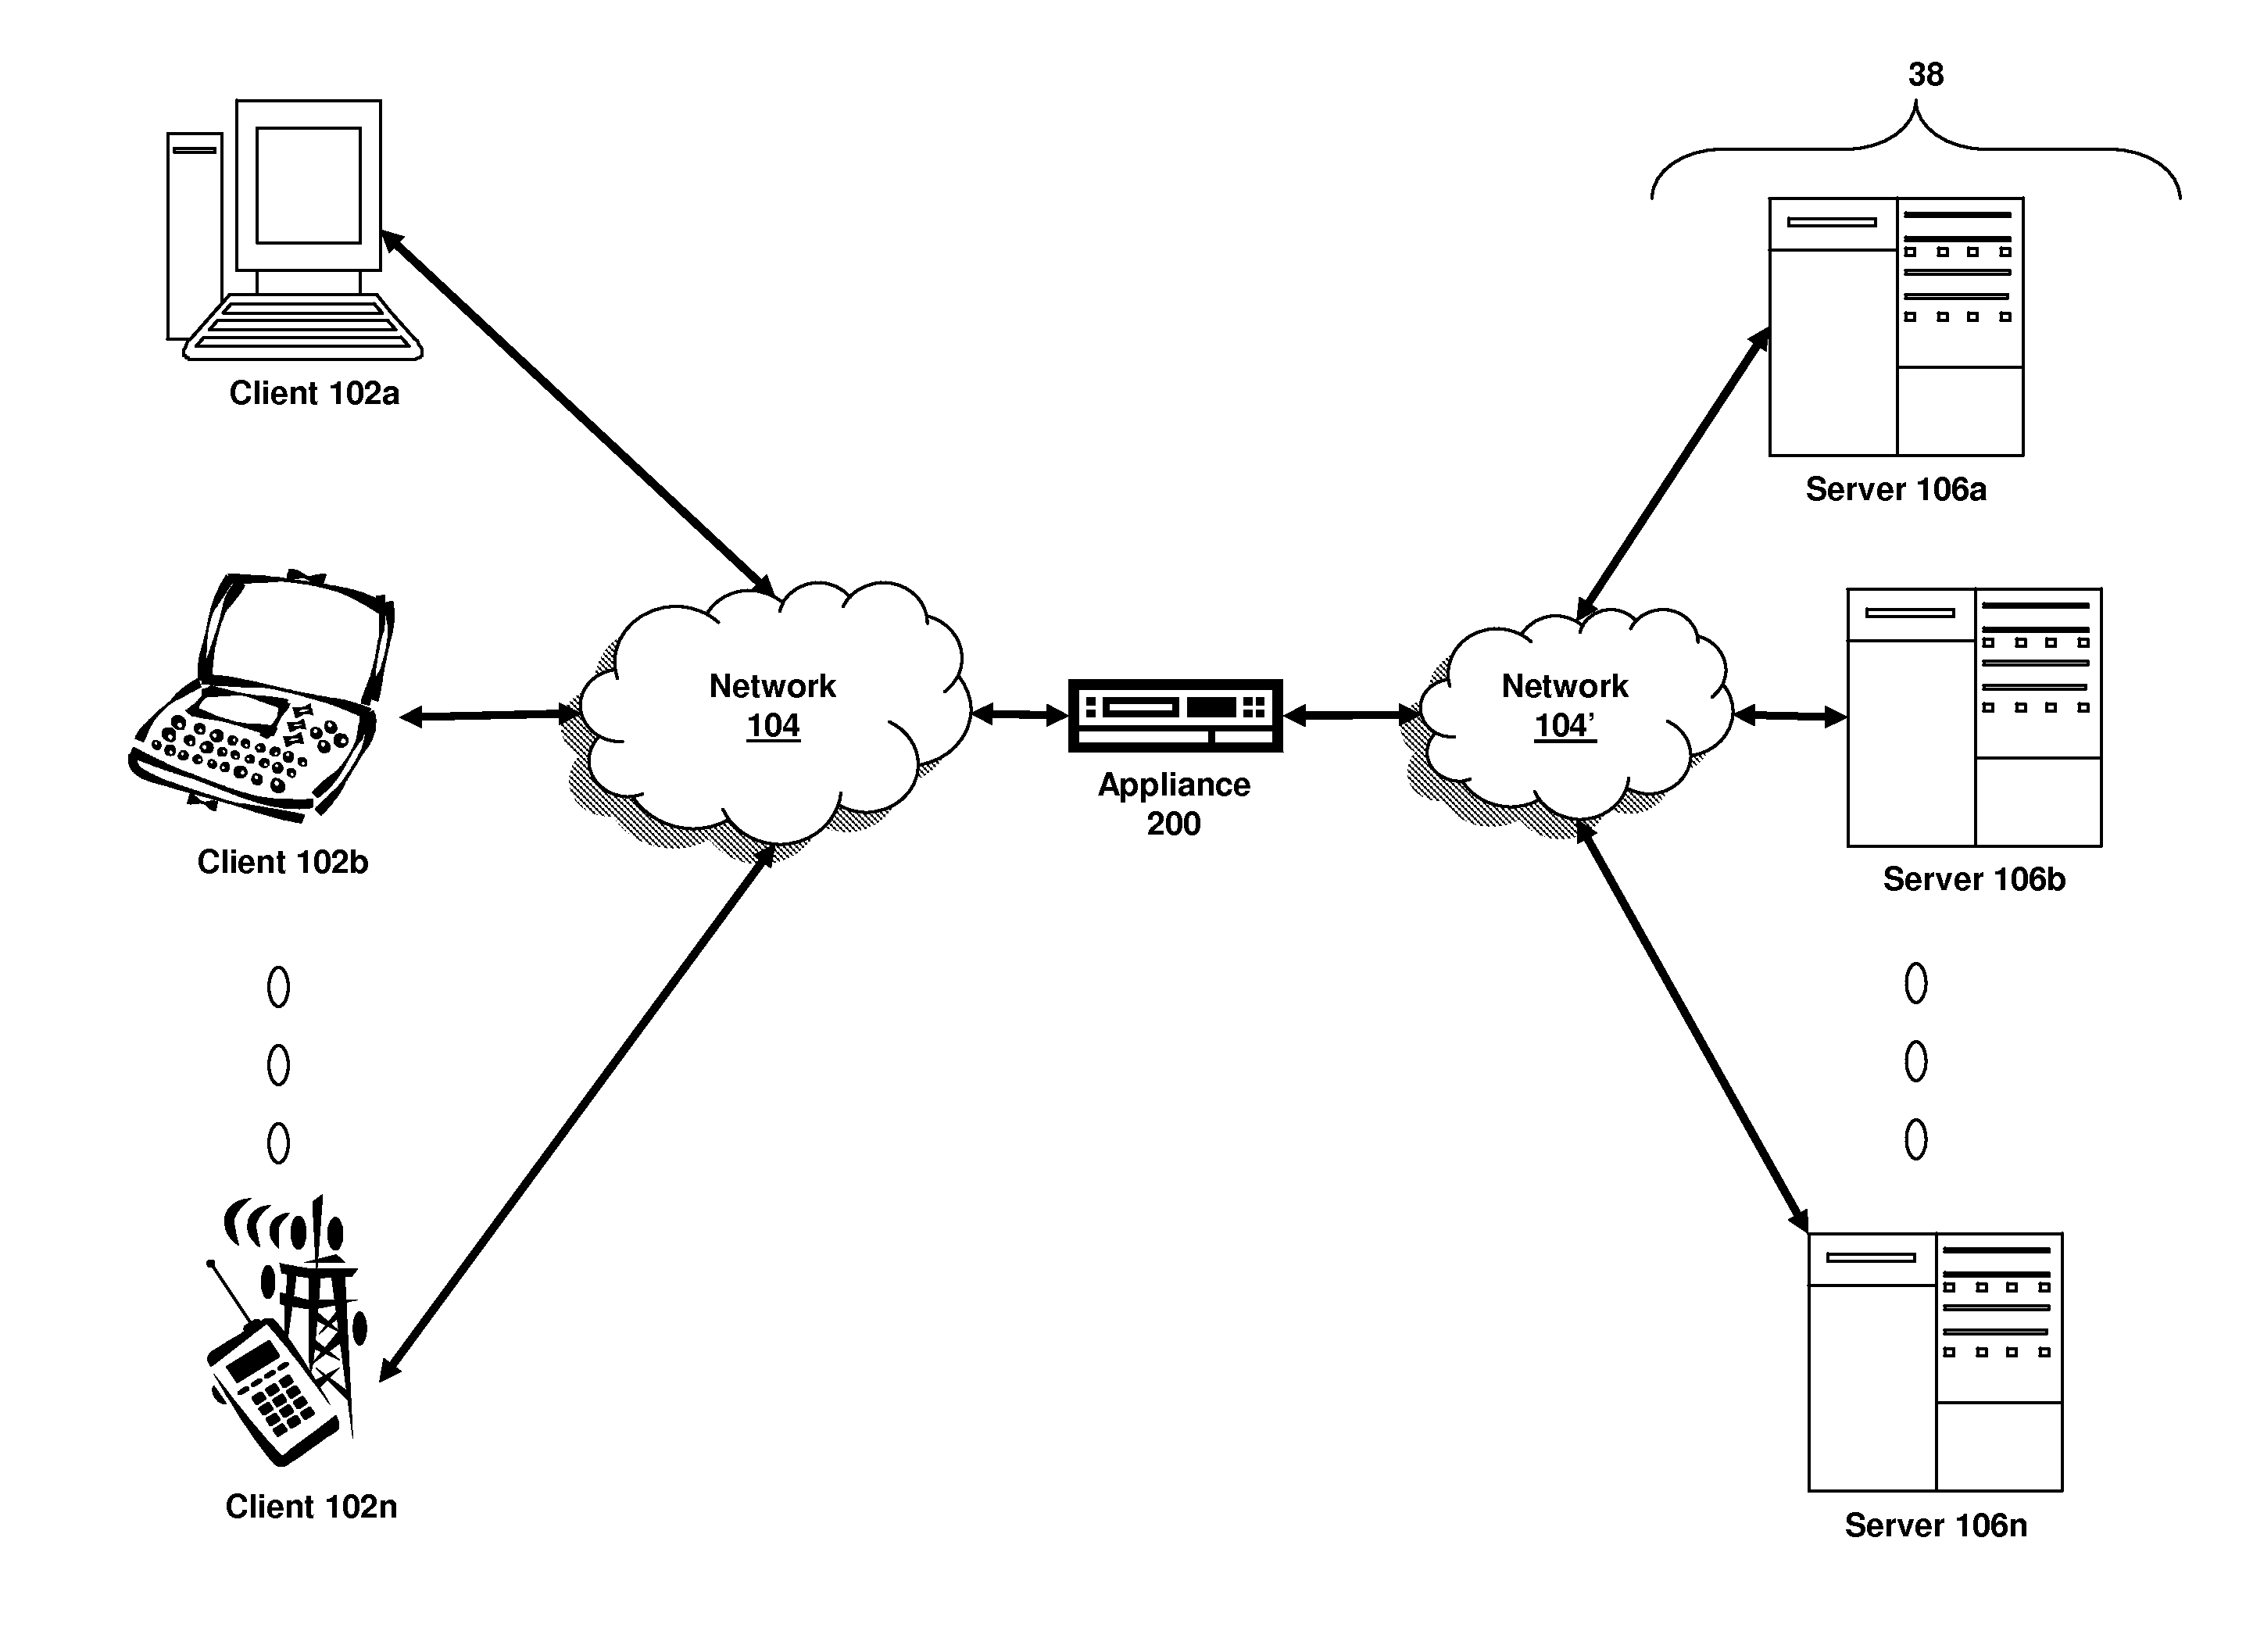 Systems and methods for cookie proxy jar management across cores in a multi-core system